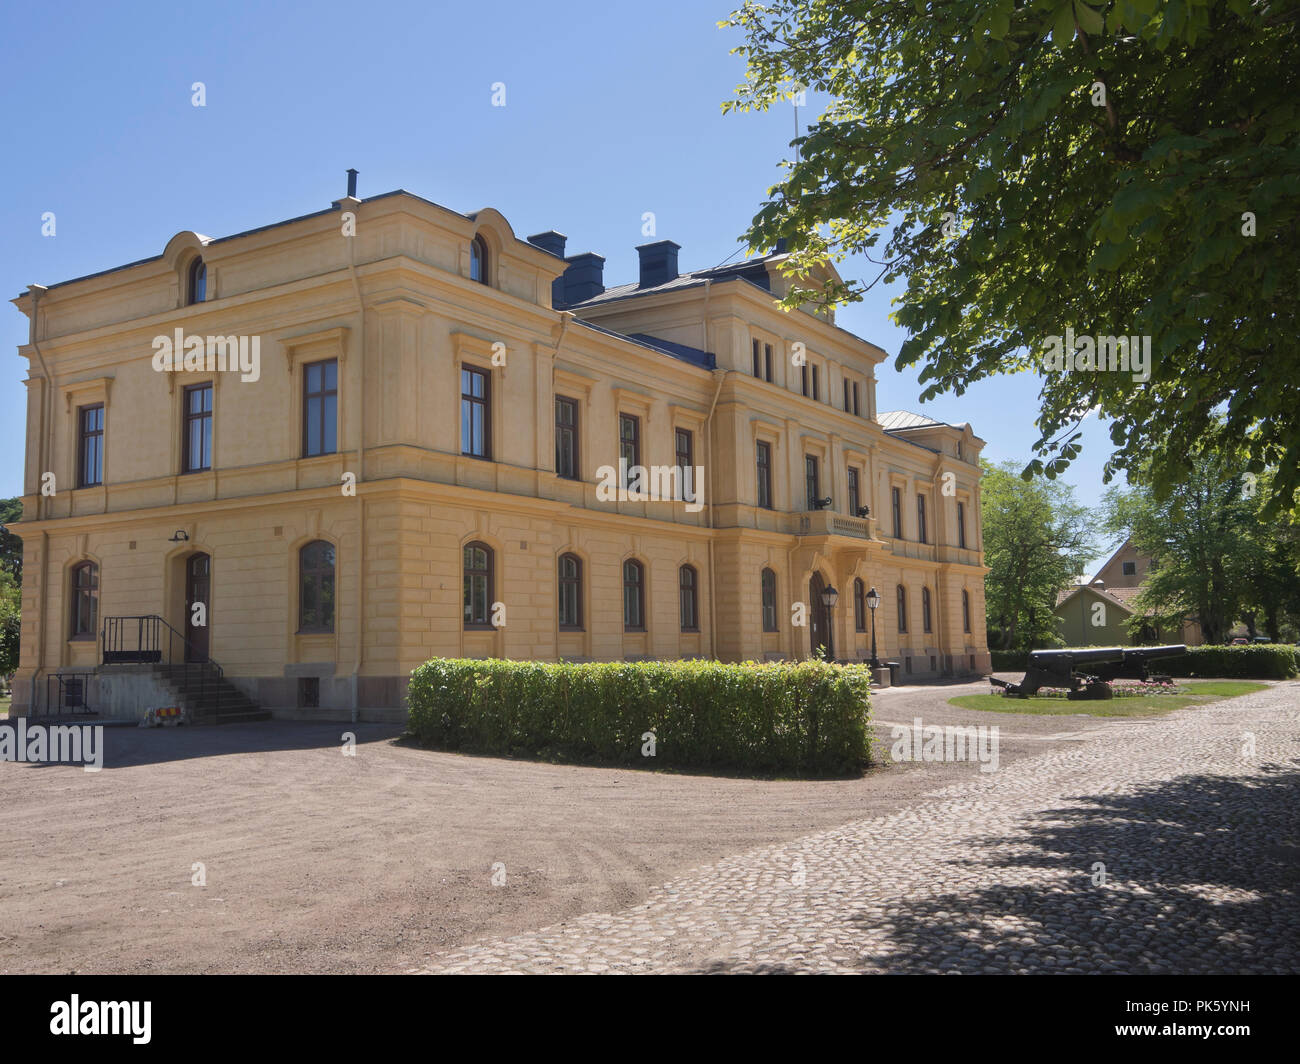 Karlsborg Fortress in Västra Götaland County in Sweden was built as central defense and reserve capital, now an idyllic and varied tourist attraction Stock Photo